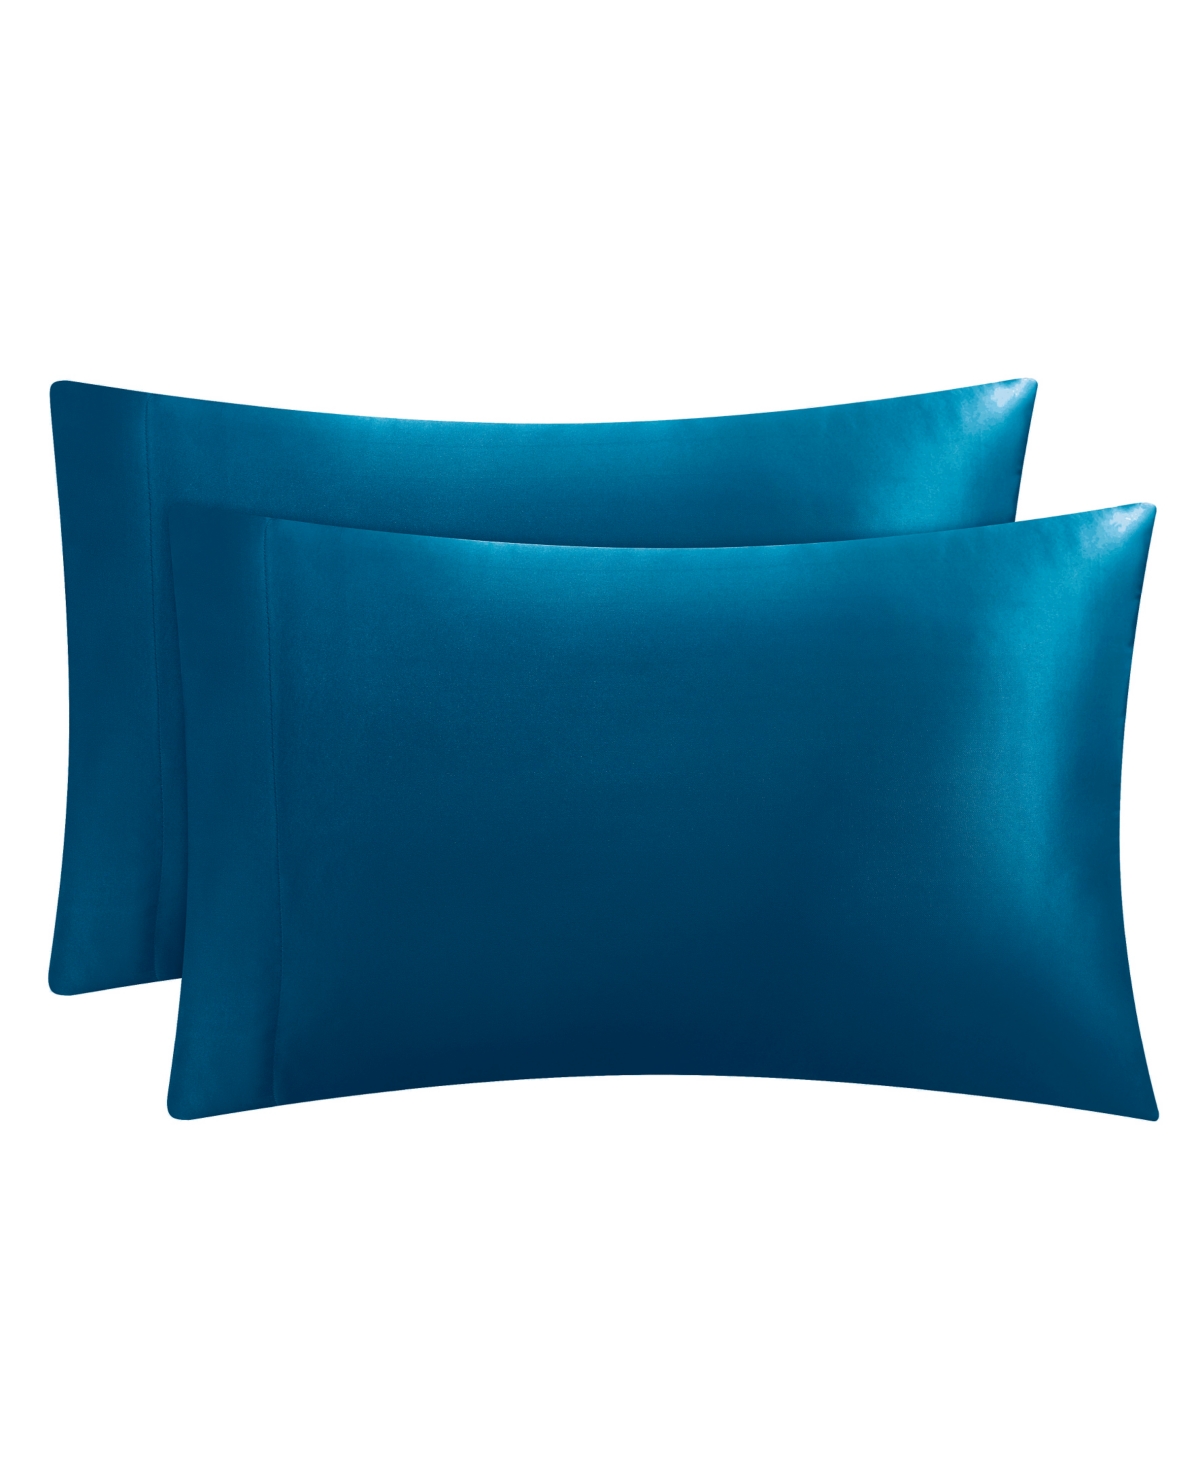 Juicy Couture Satin 2 Piece Pillow Case Set, Queen In Blue